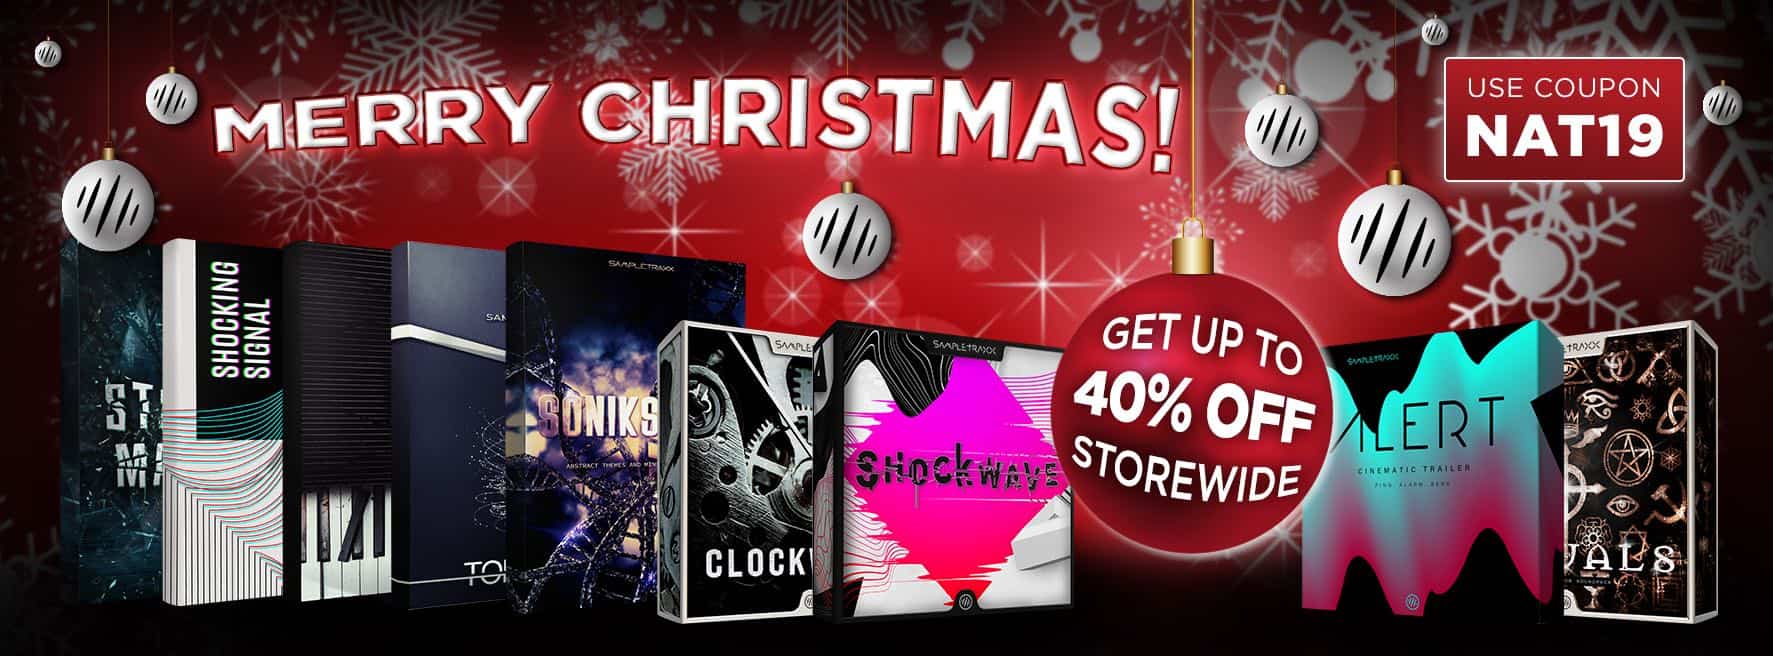 SampleTraxx Sale – up to 40% off merrychristmas